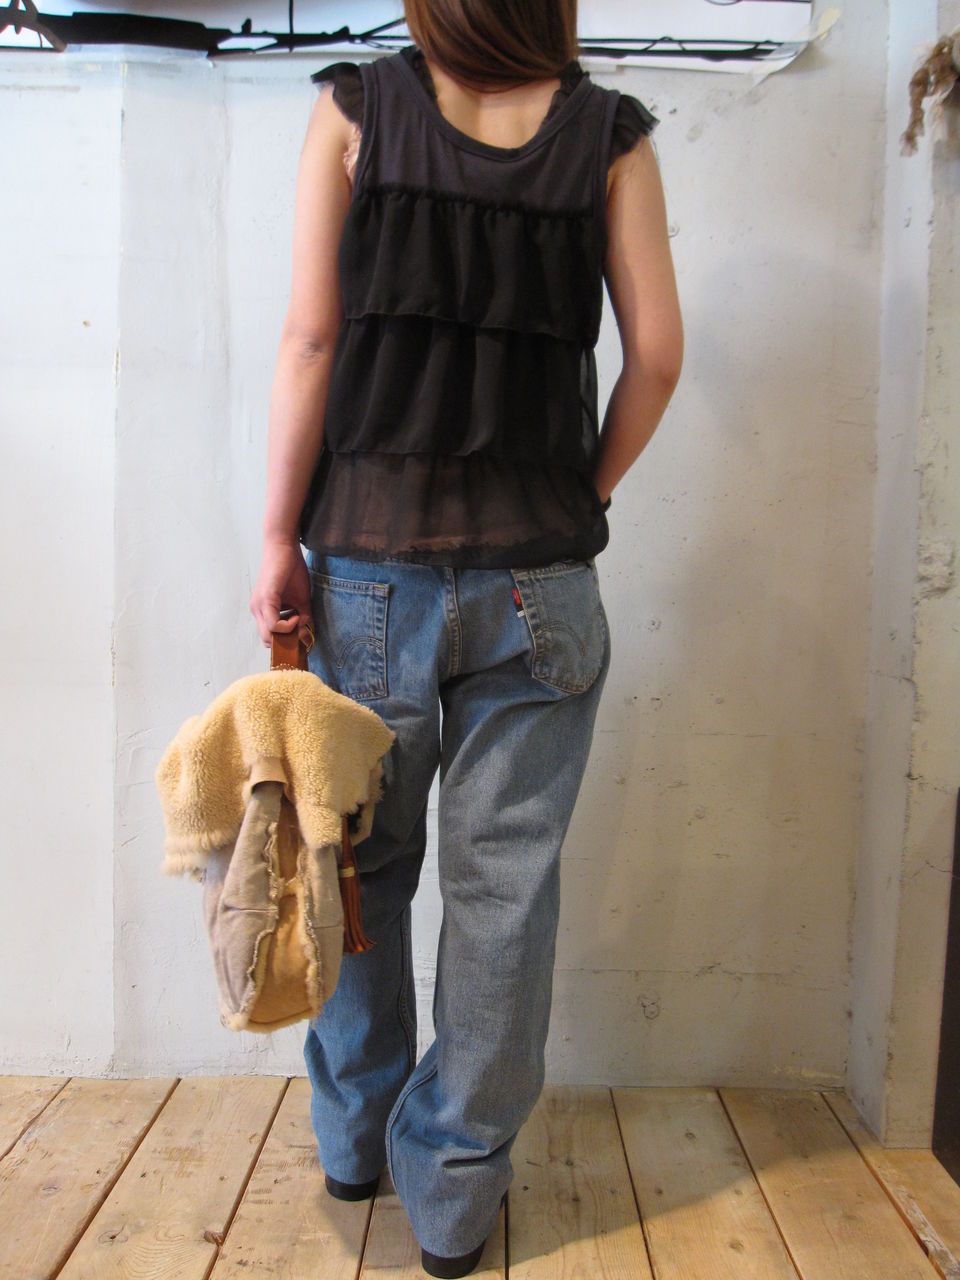 NEW ARRIVAL or COORDINATES② January 2011